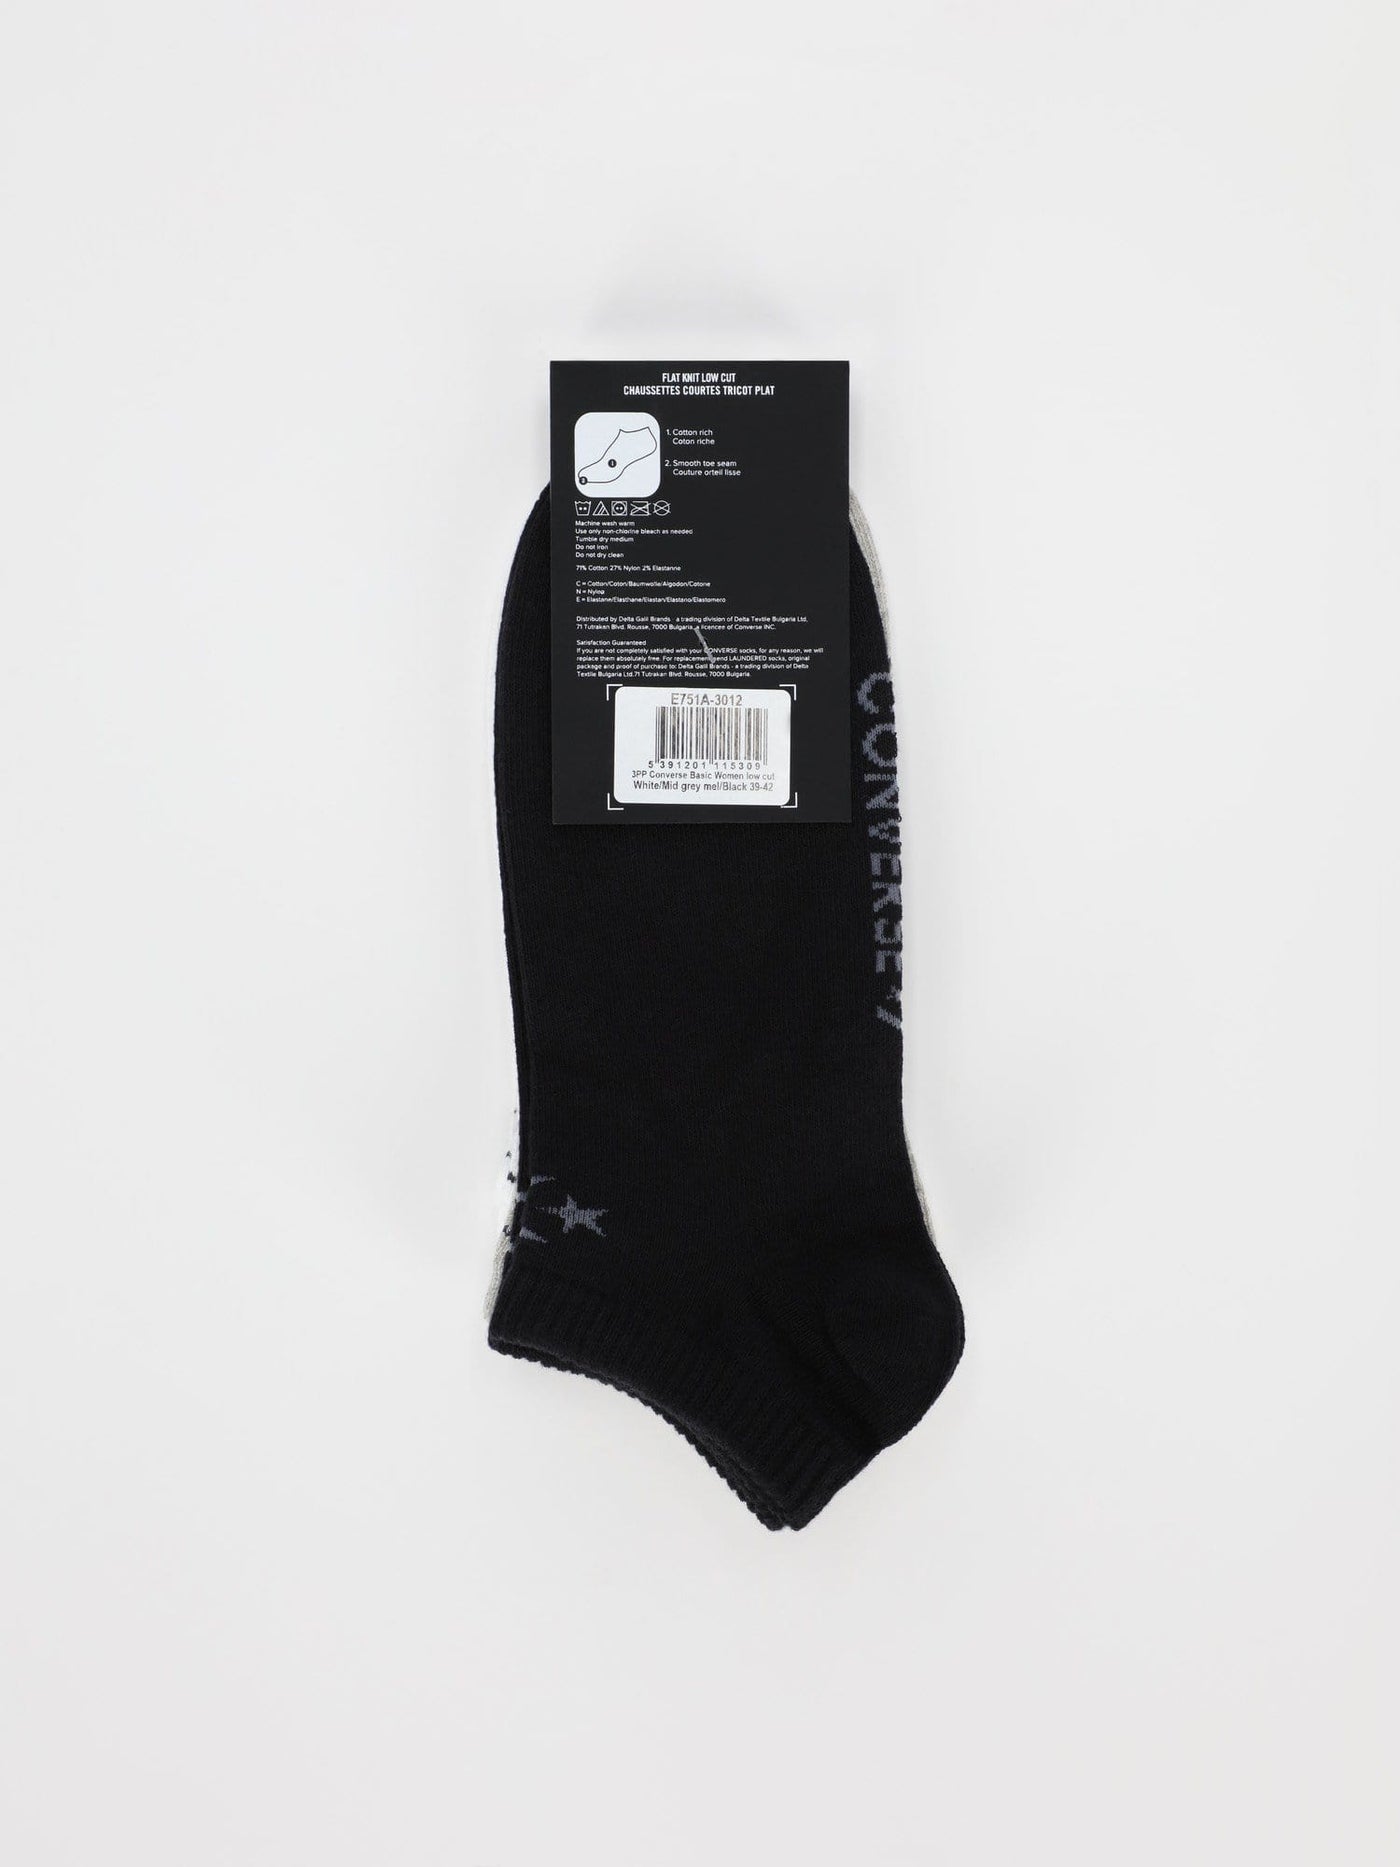 Converse Other Accessories 71 / 39-42 3 Pairs of Flat Knit Low Cut Socks with Star Chevron Logo - Light Grey/White/Black